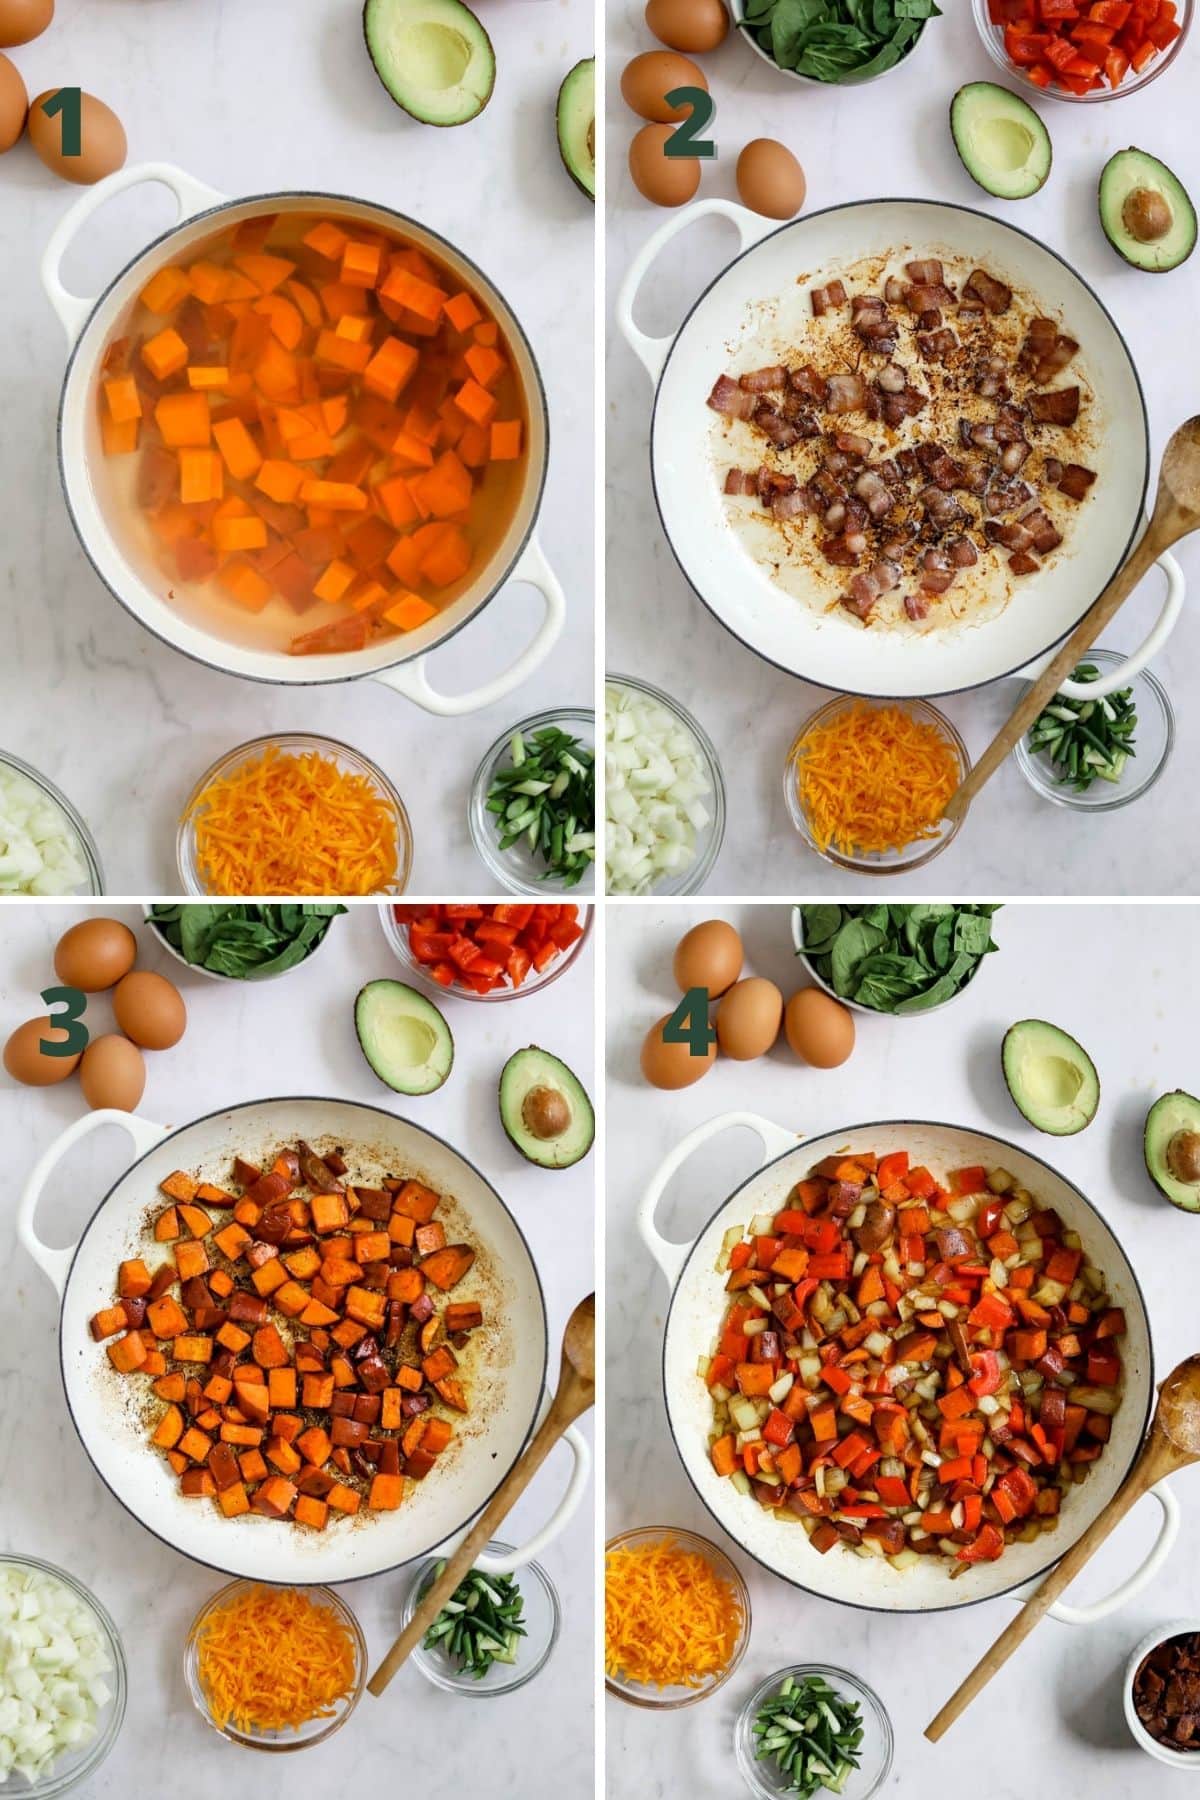 Steps to make Breakfast hash with sweet potatoes. including cooking sweet potato cubes, bacon, onions, and bell pepper.